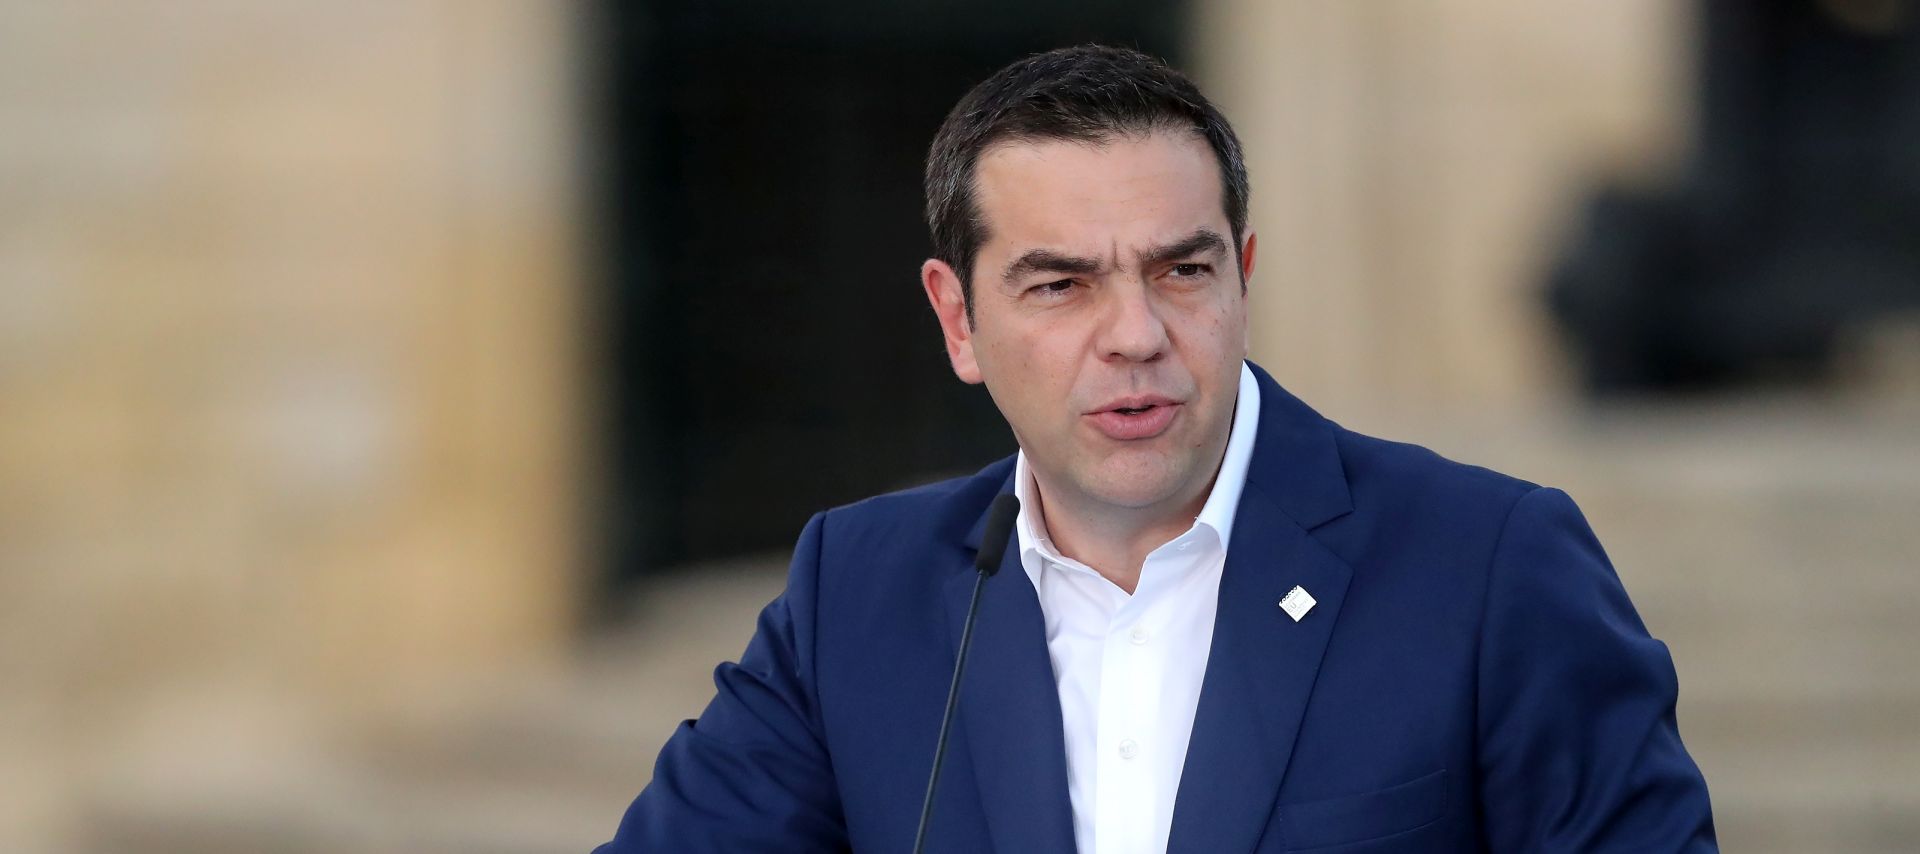 epa07648772 Alexis Tsipras, Greek Prime Minister speaks during the Southern European Countries Summit MED7 (Cyprus, France, Italy, Greece, Portugal, Malta and Spain) press conference at the  Auberge de Castille in Valletta, Malta, 14 June 2019.  EPA/DOMENIC AQUILINA